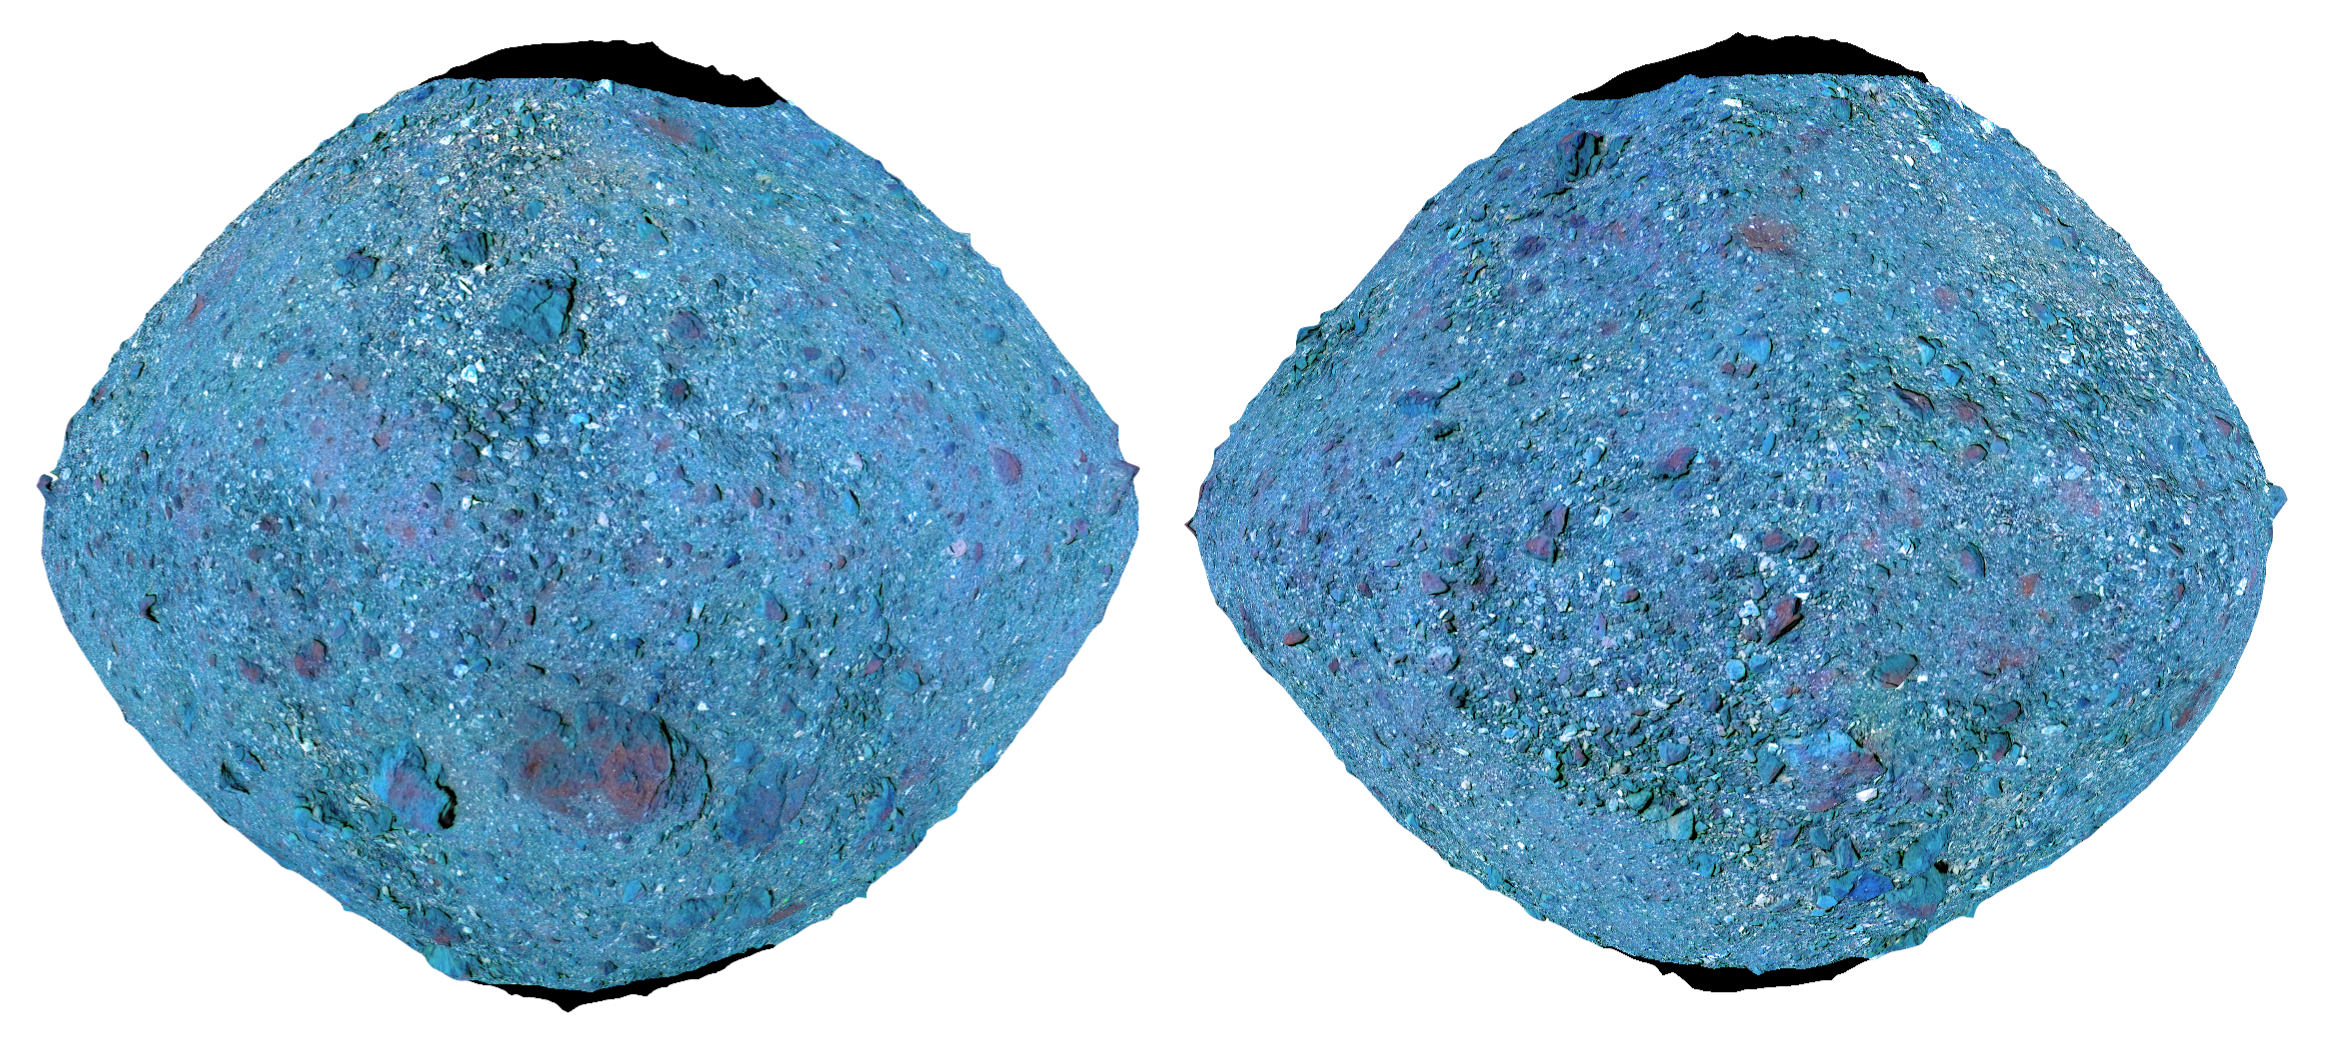 two blue images of asteroid Bennu